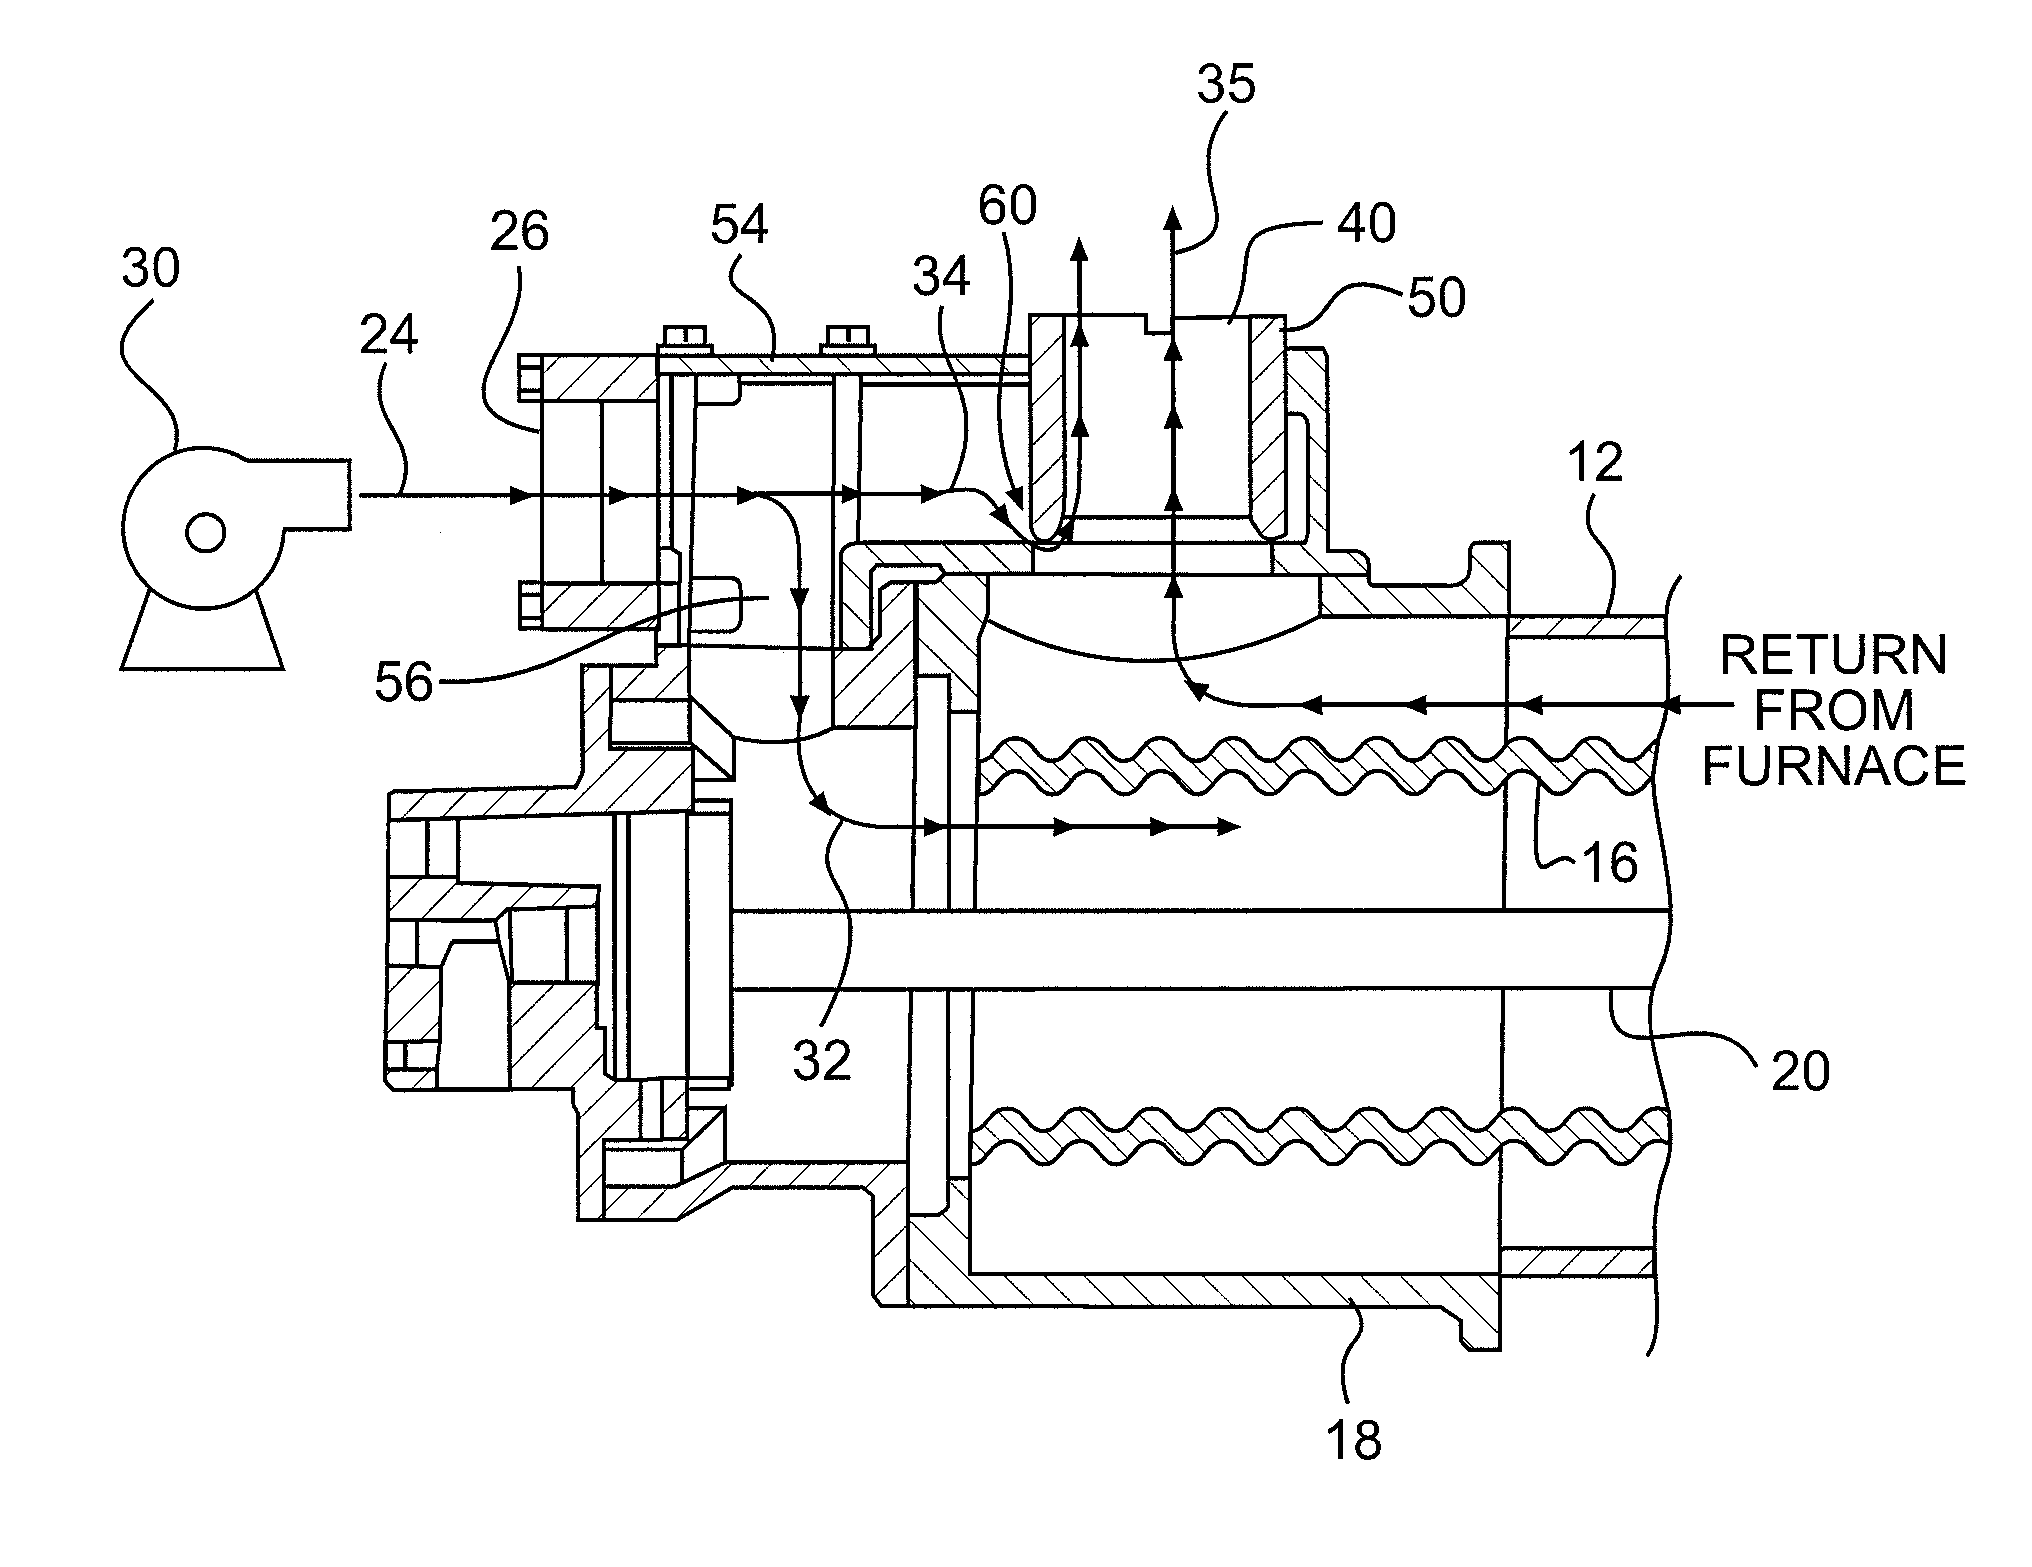 Burner with split combustion and exhaust induction air paths